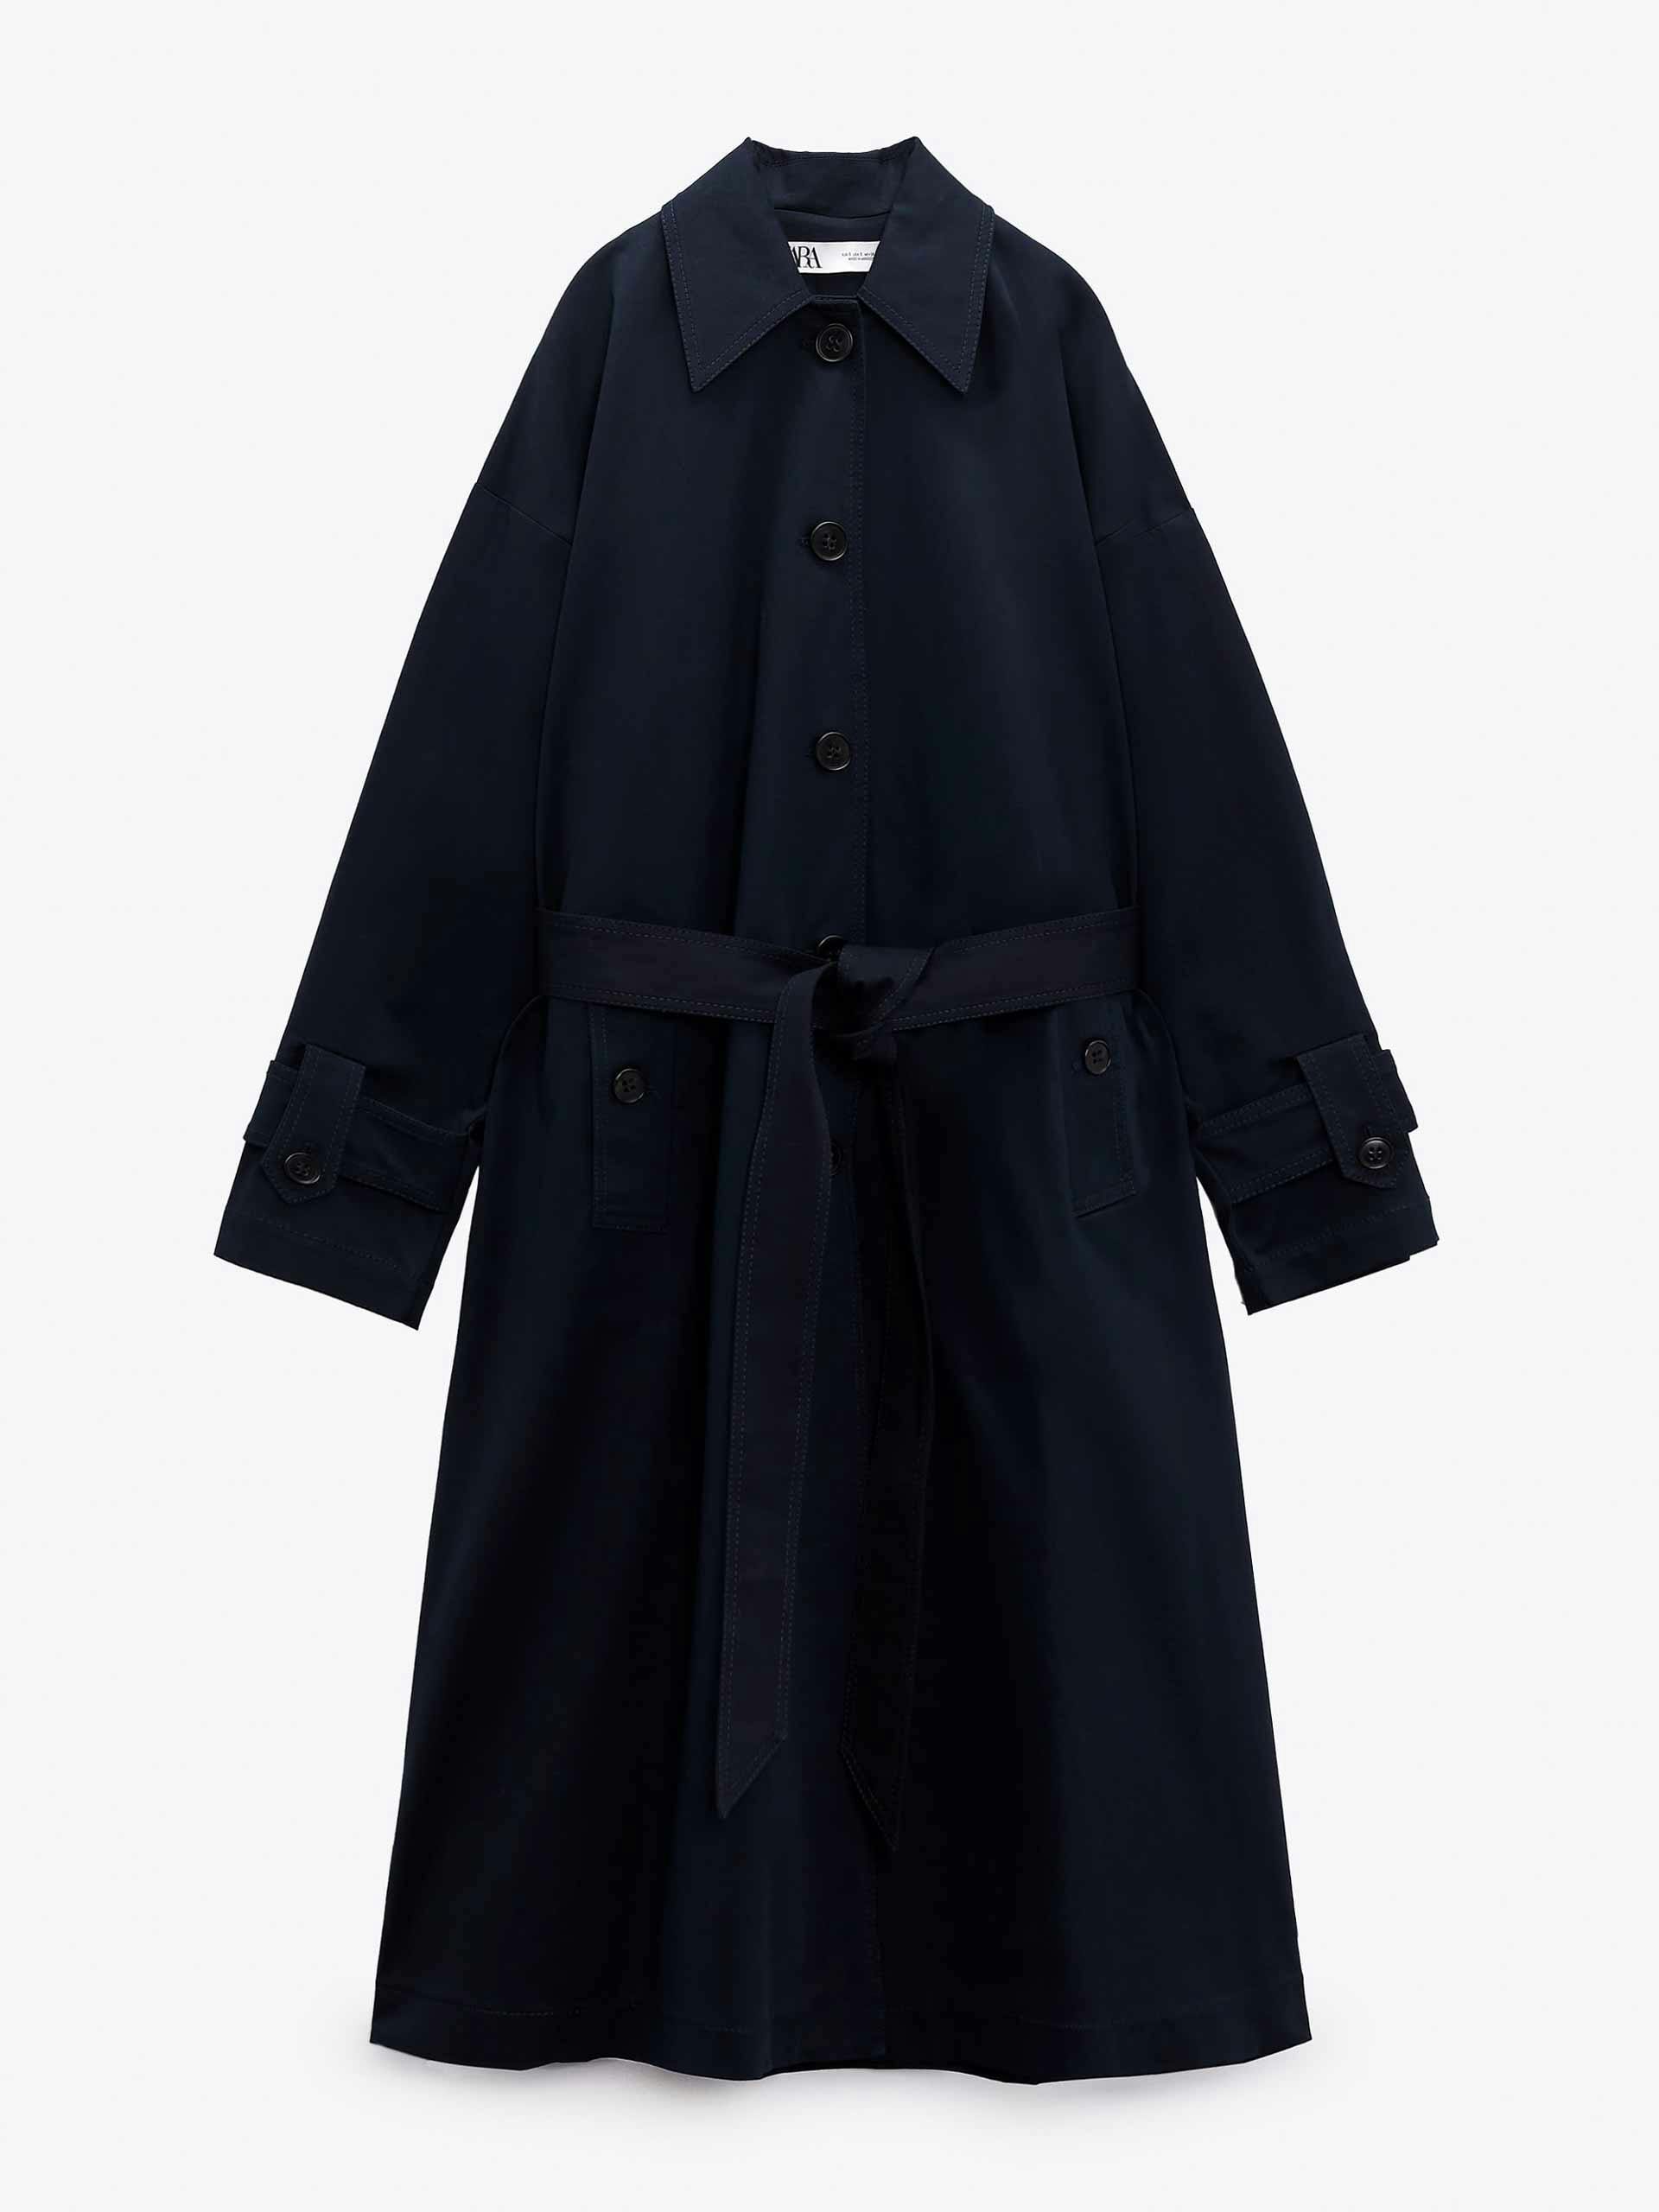 Oversize trench coat with belt